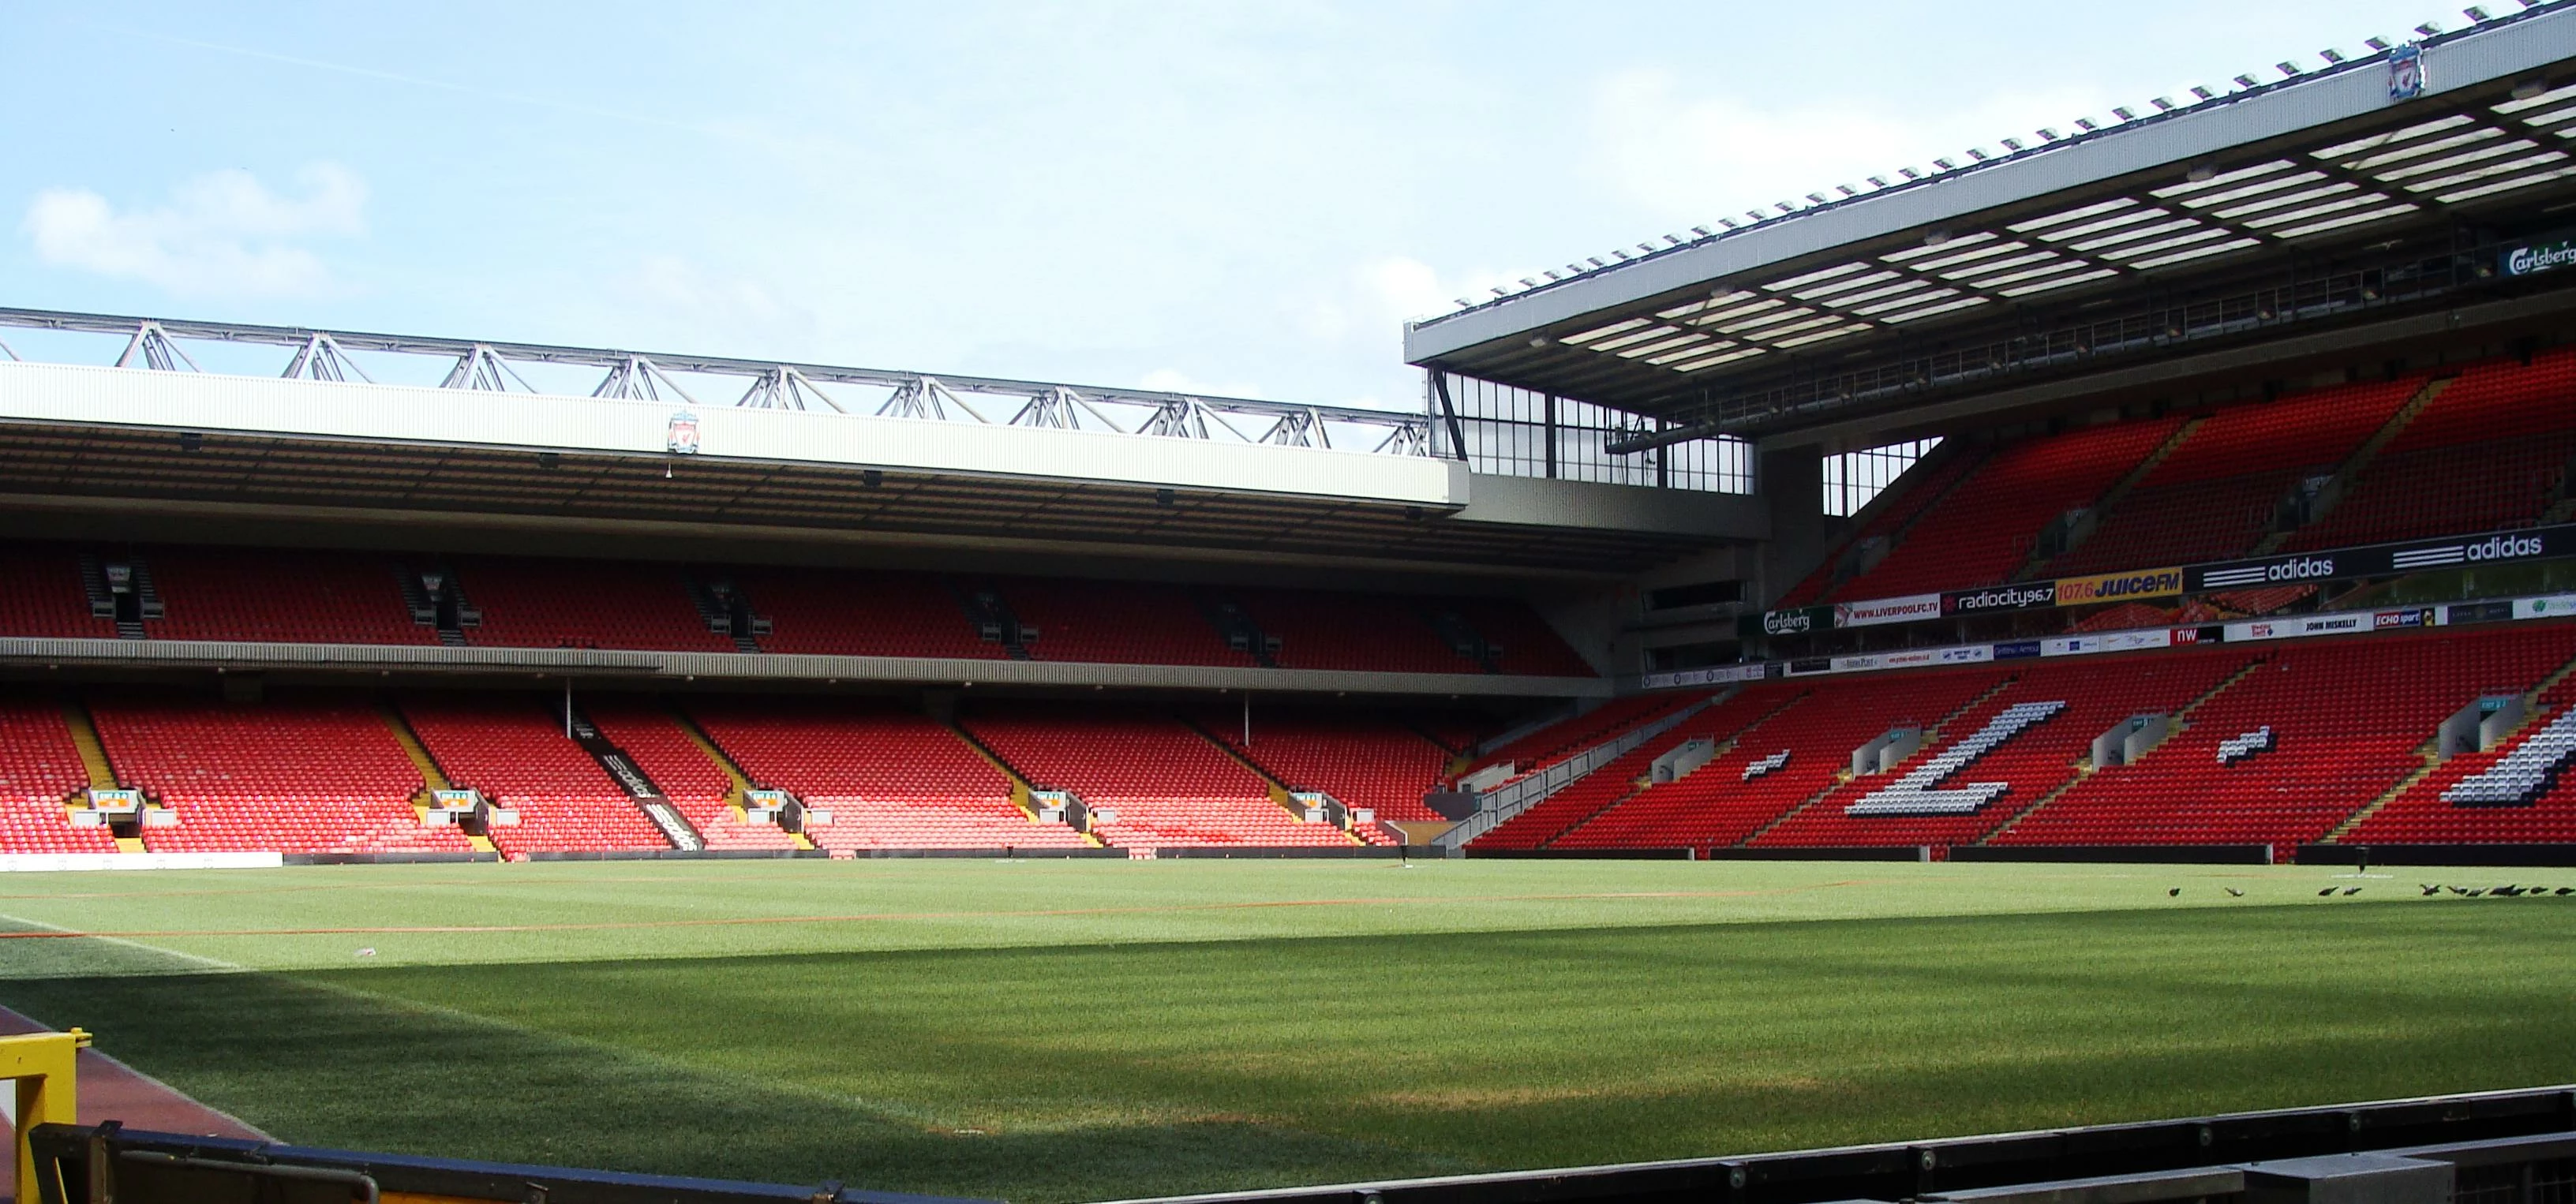 The Anfield pitch